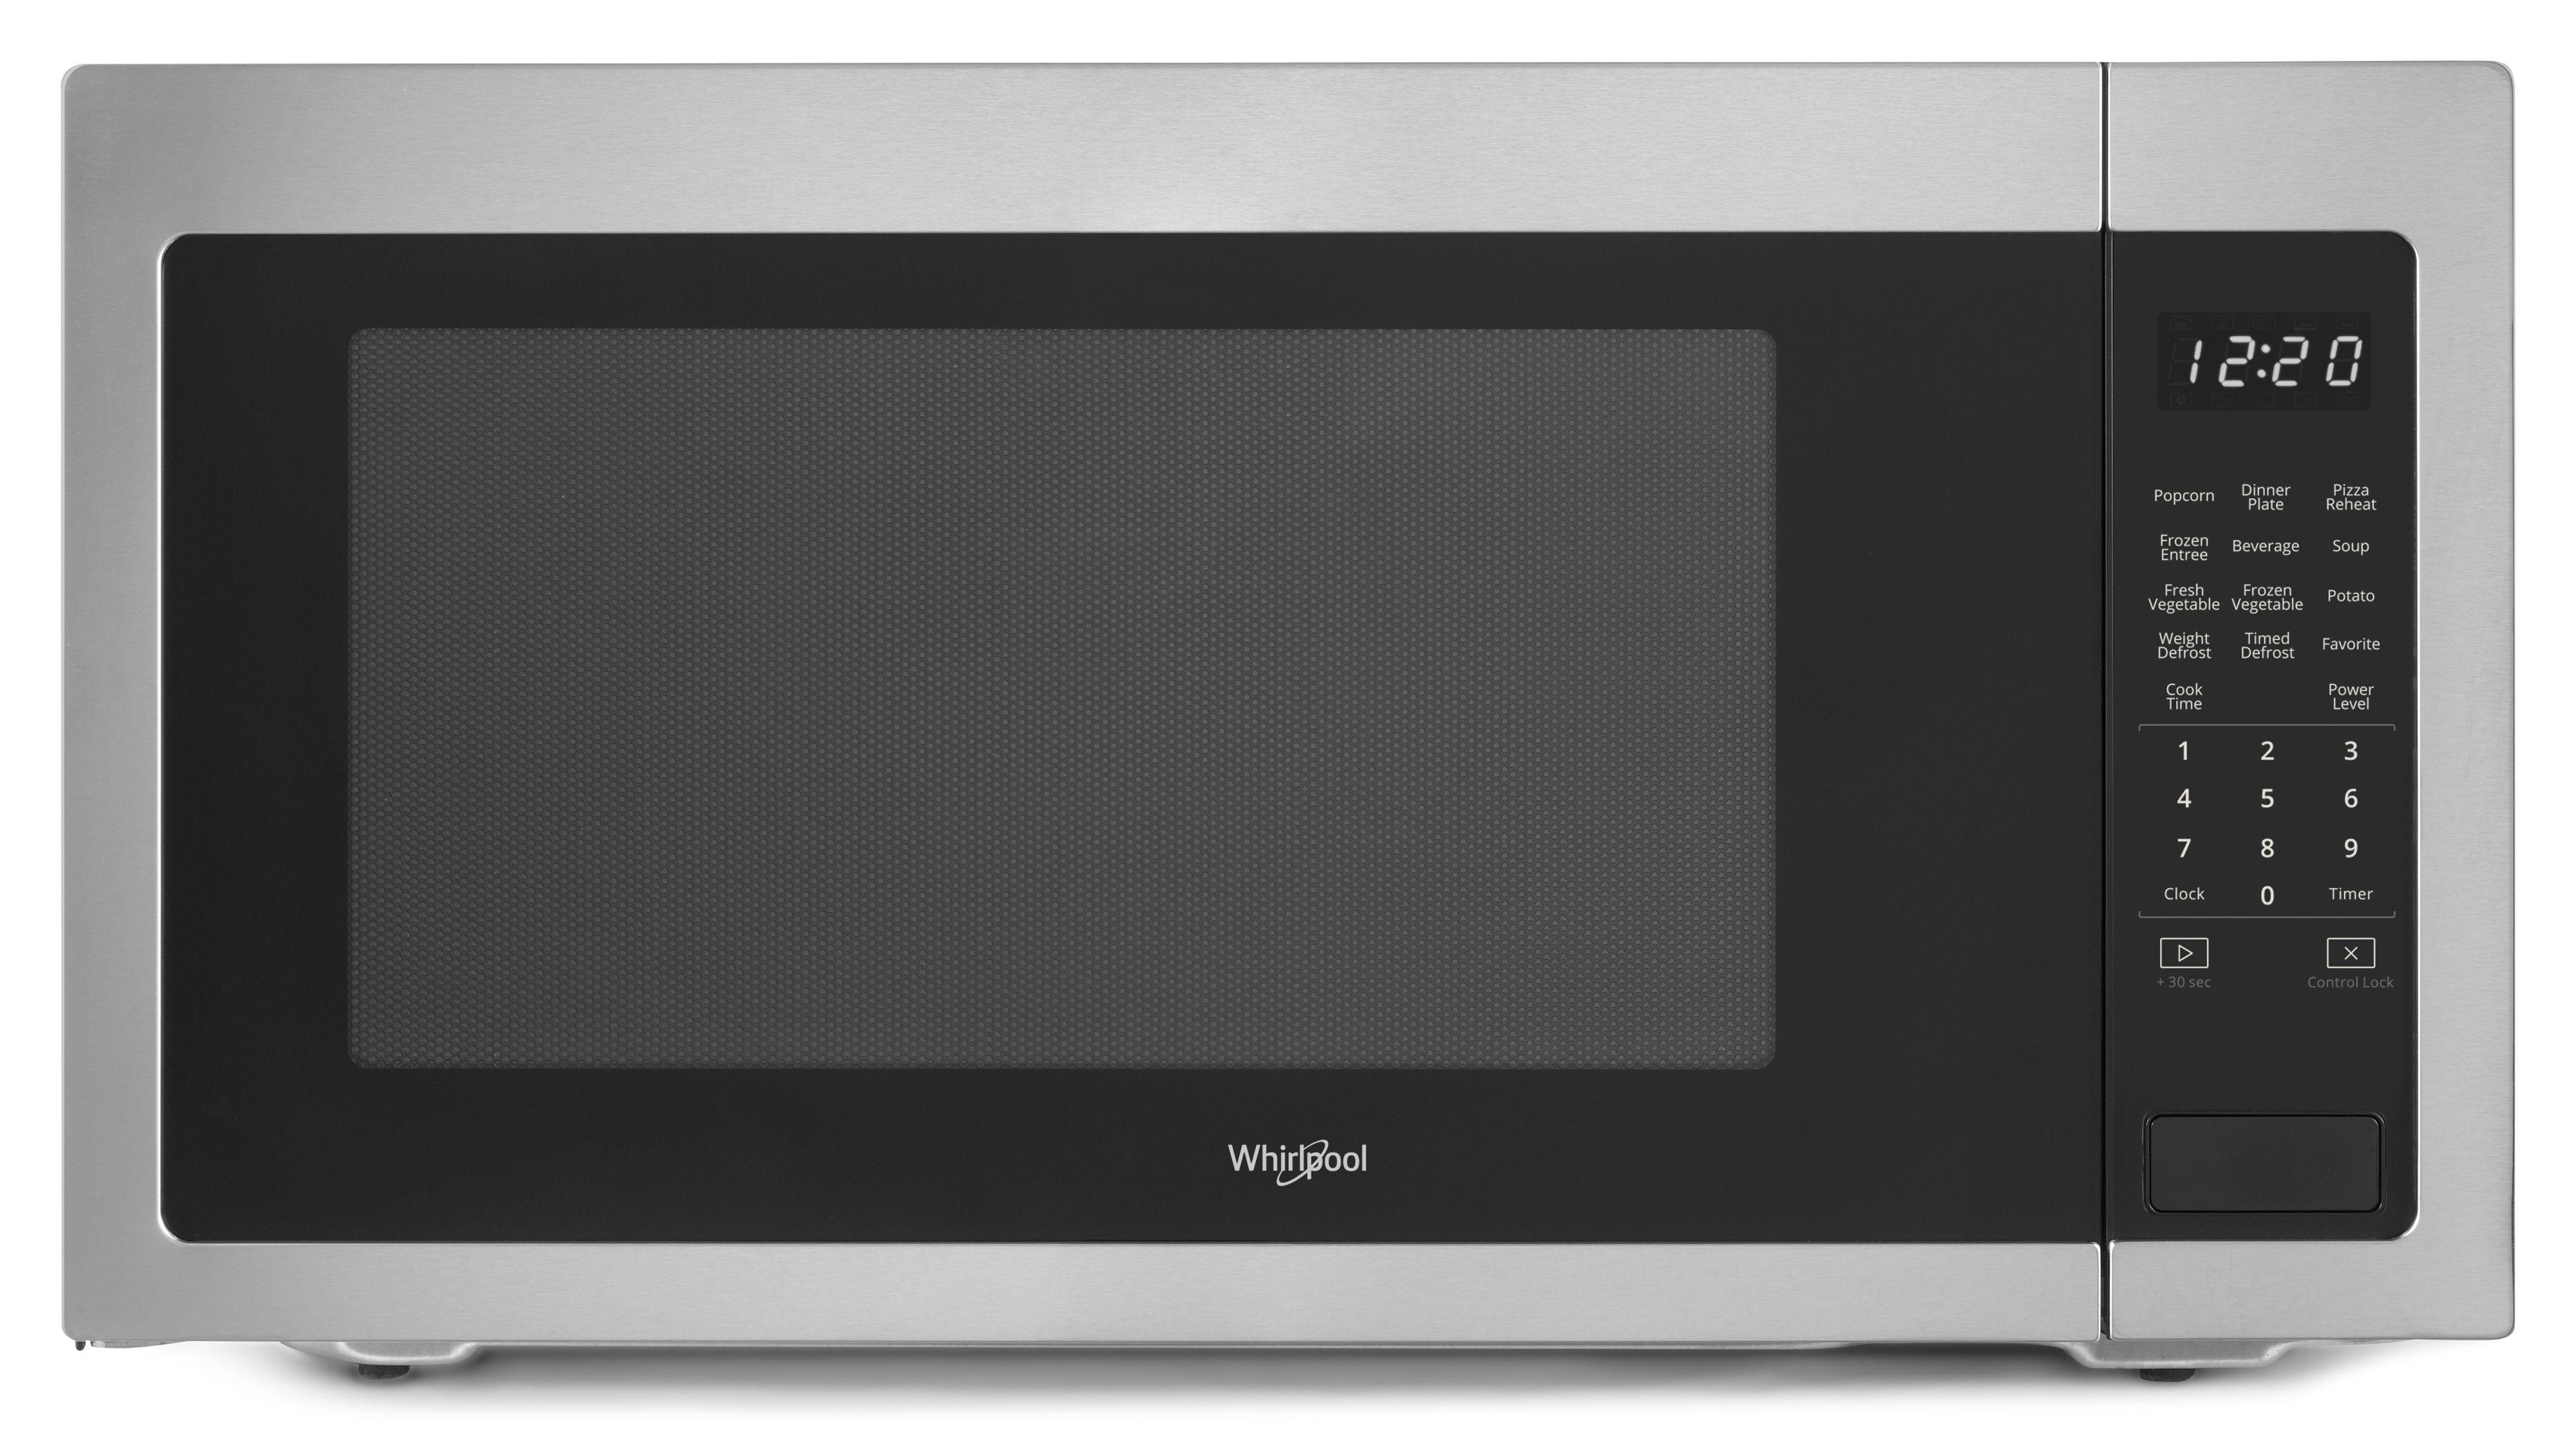 Whirlpool WMC50522HZ 24 Inch Countertop Microwave with 2.2 cu. ft